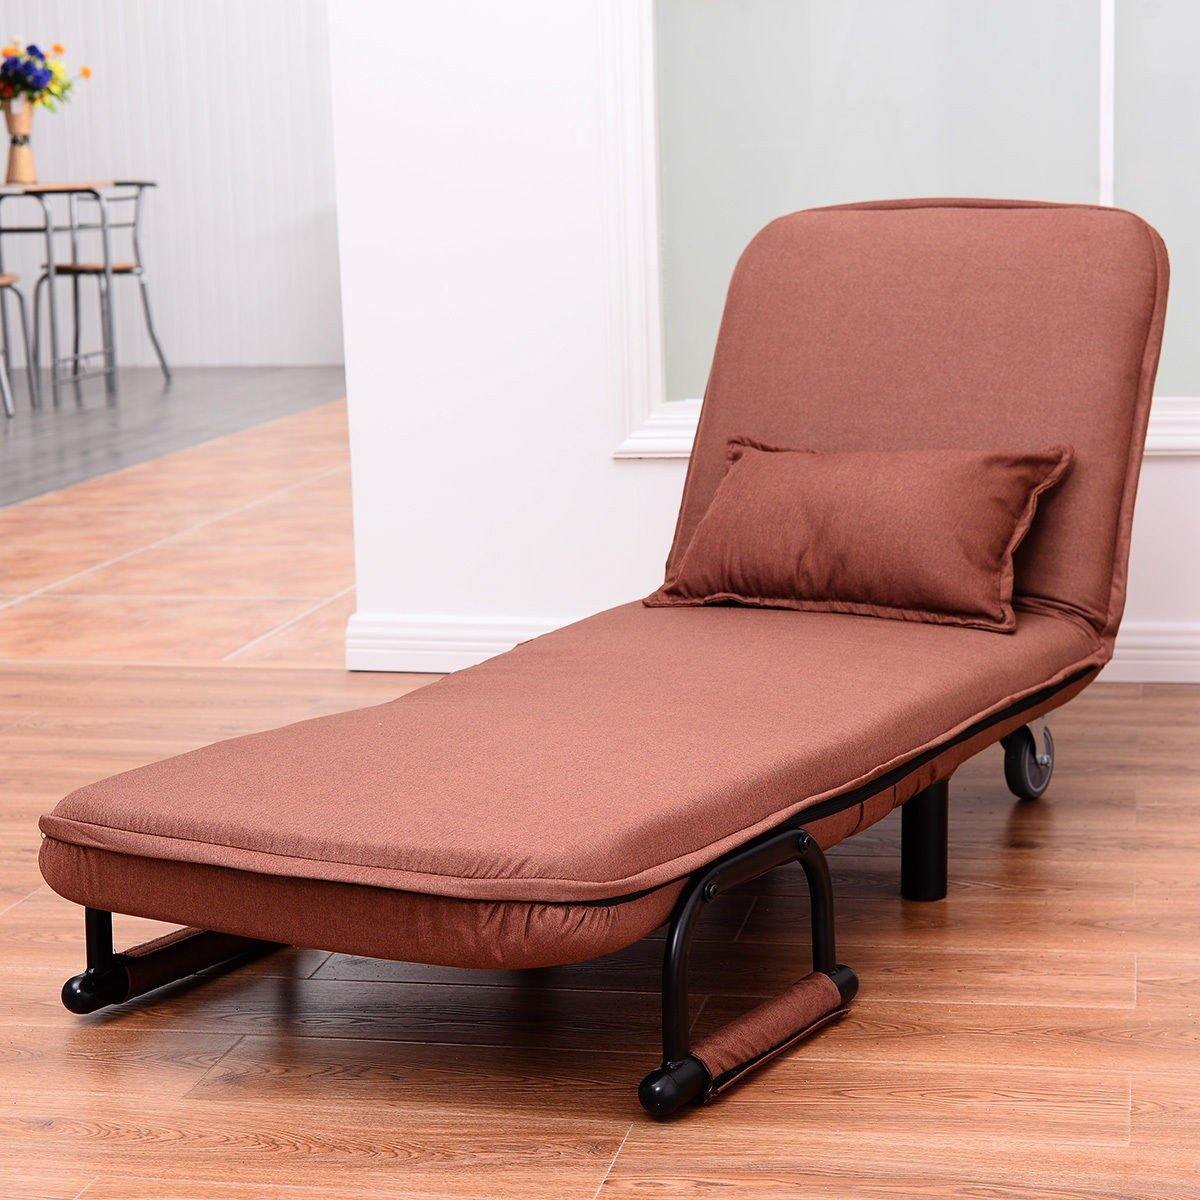 26.5" Convertible Sofa Bed Folding Arm Chair Sleeper Leisure Recliner Lounge Couch - Giantexus